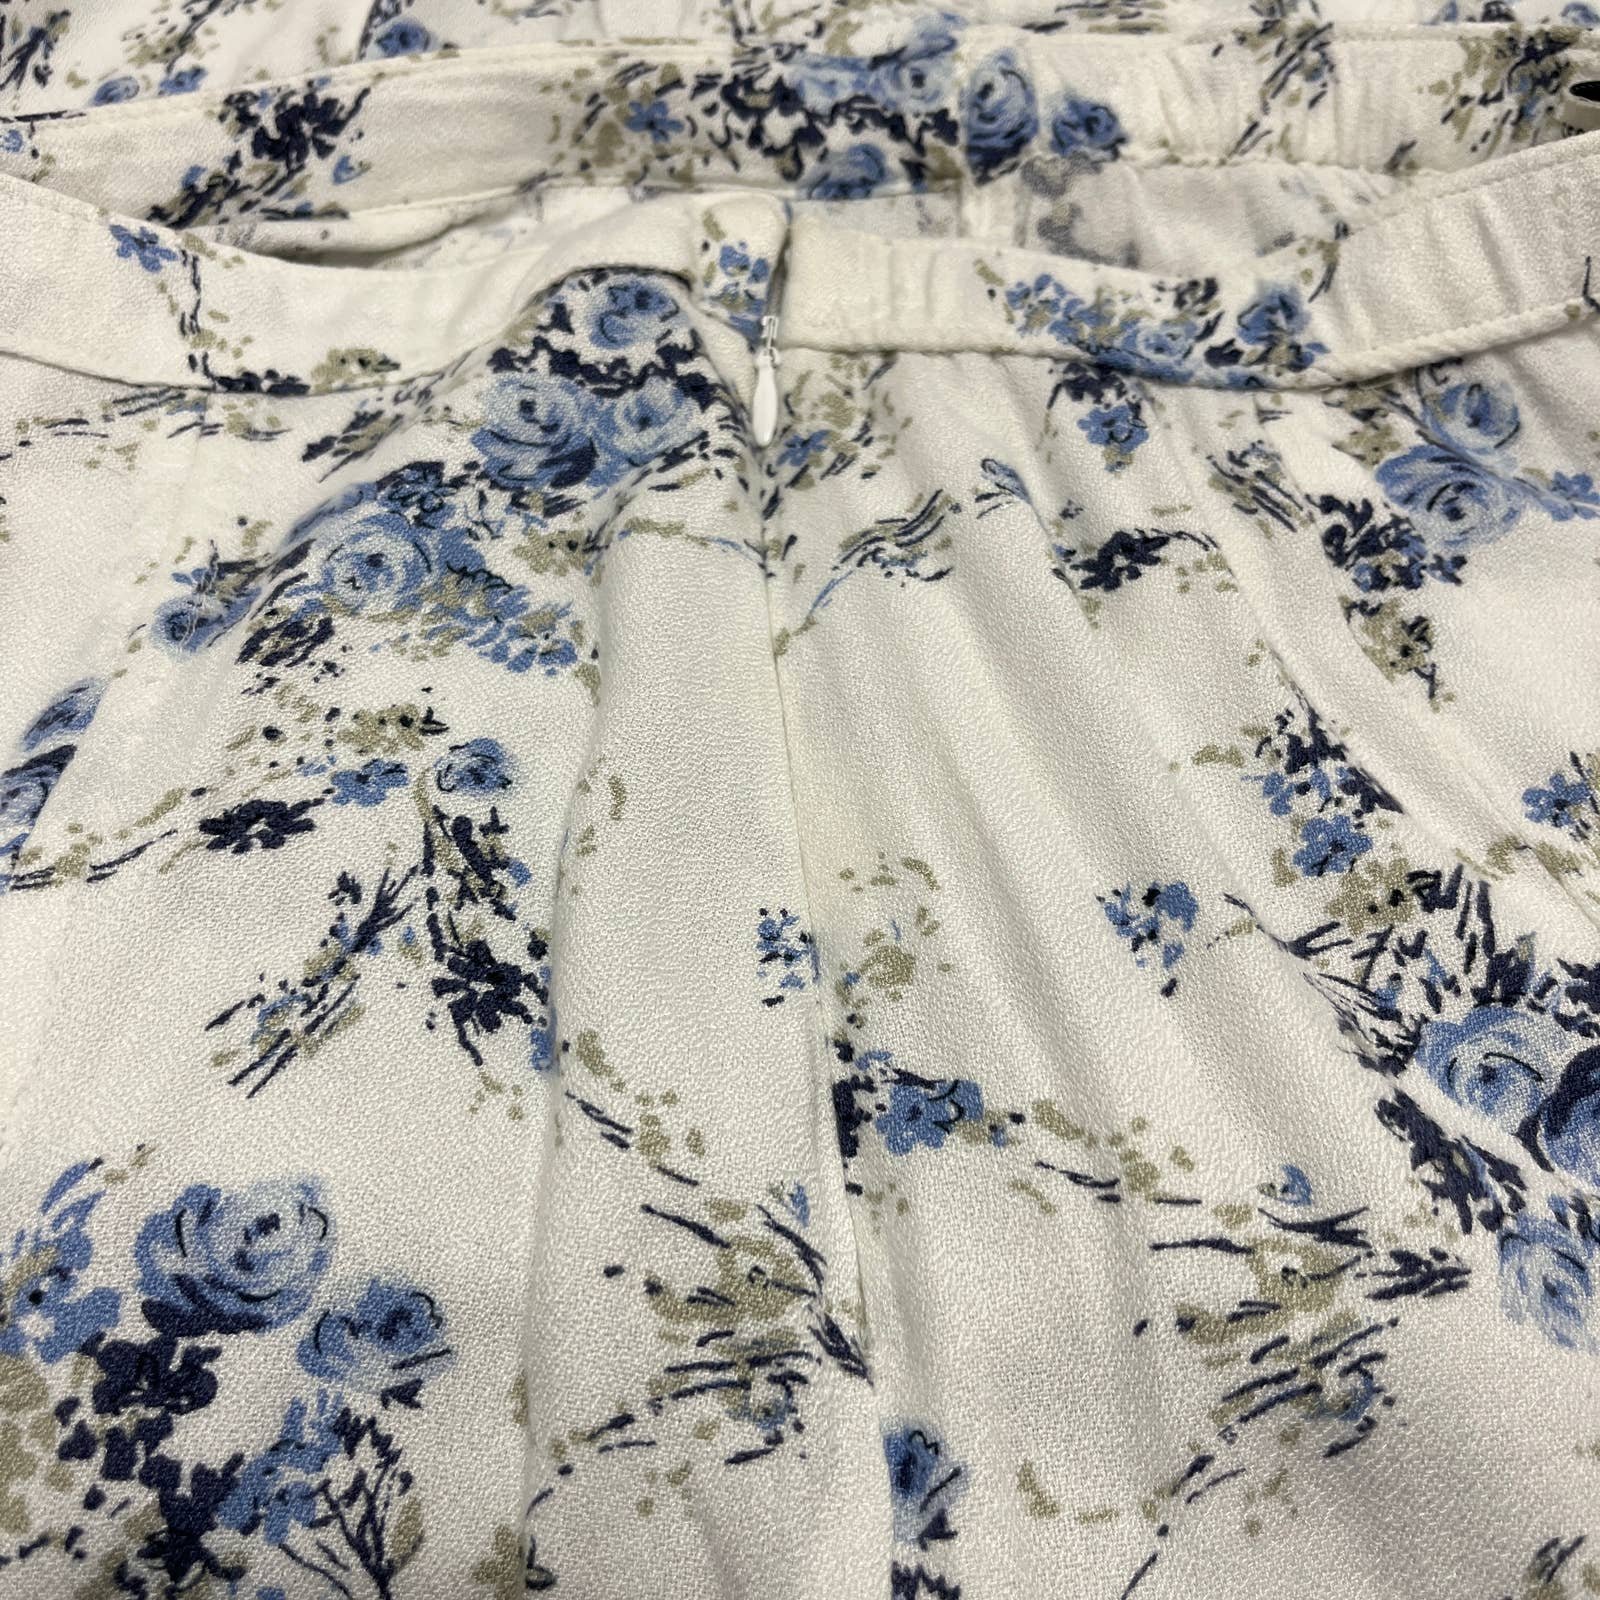 Beautiful Abercrombie & Fitch Floral Ruffle Midi Skirt with Slit Size S nKwGhWJ3d well sale